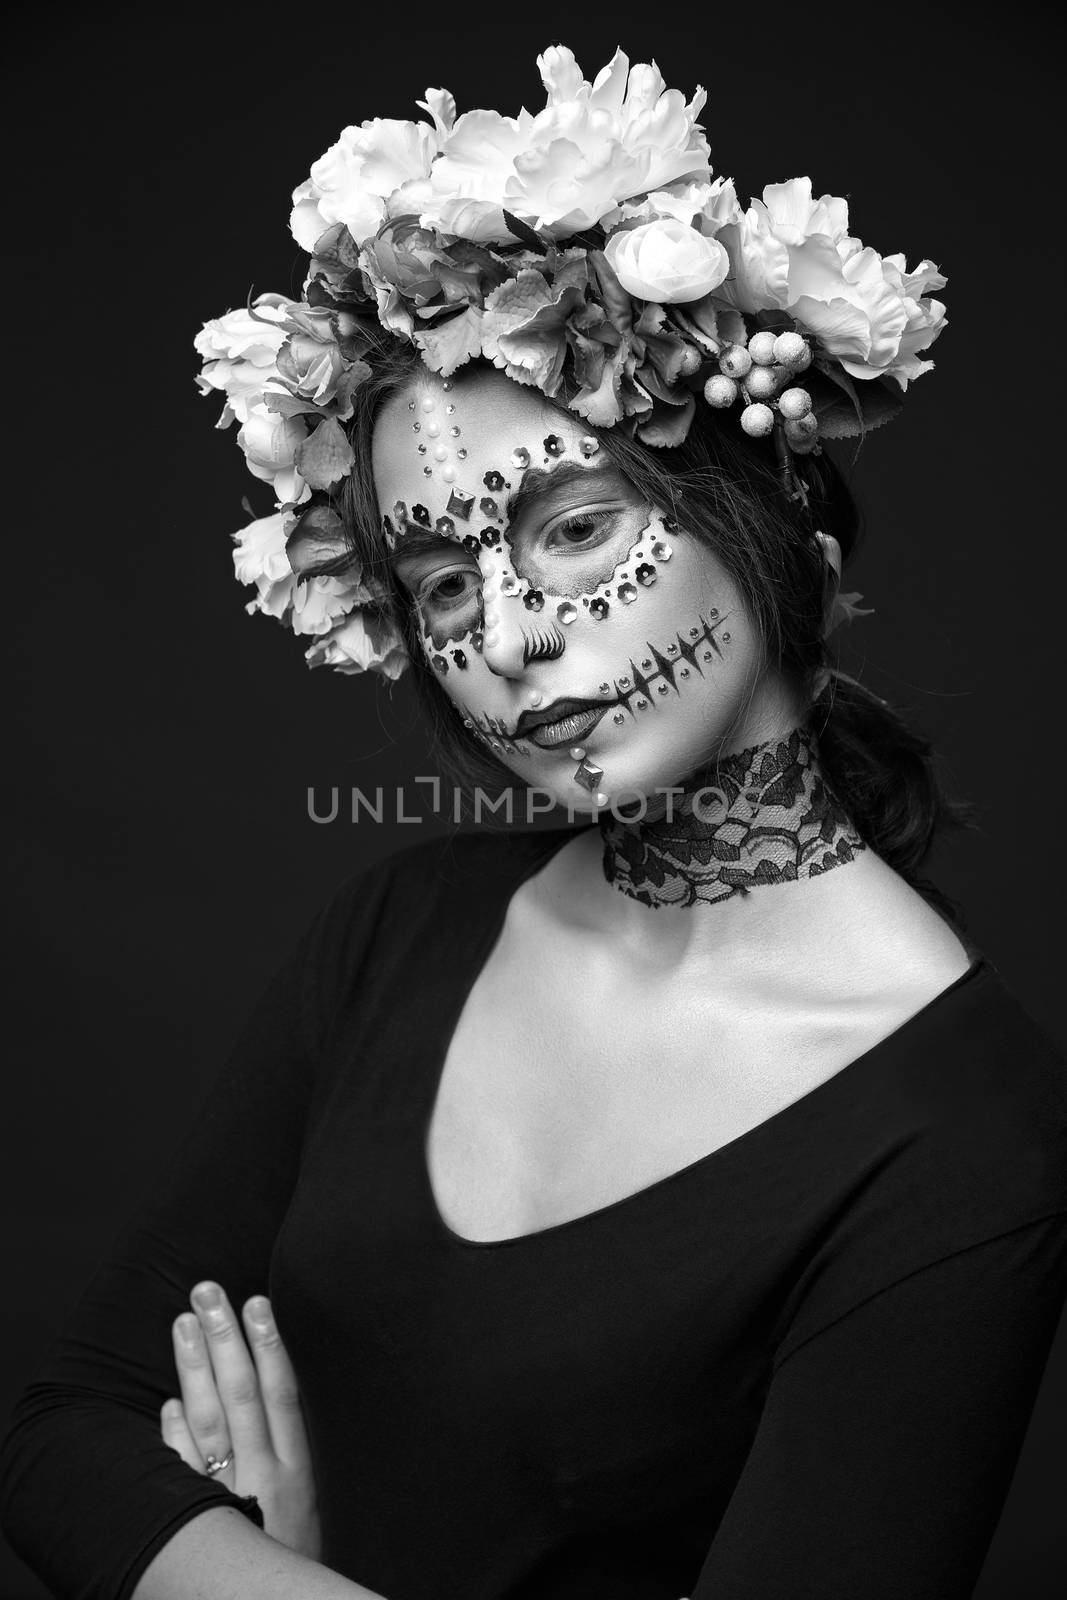 Halloween Makeup with Rhinestones and Wreath of Flowers by Multipedia